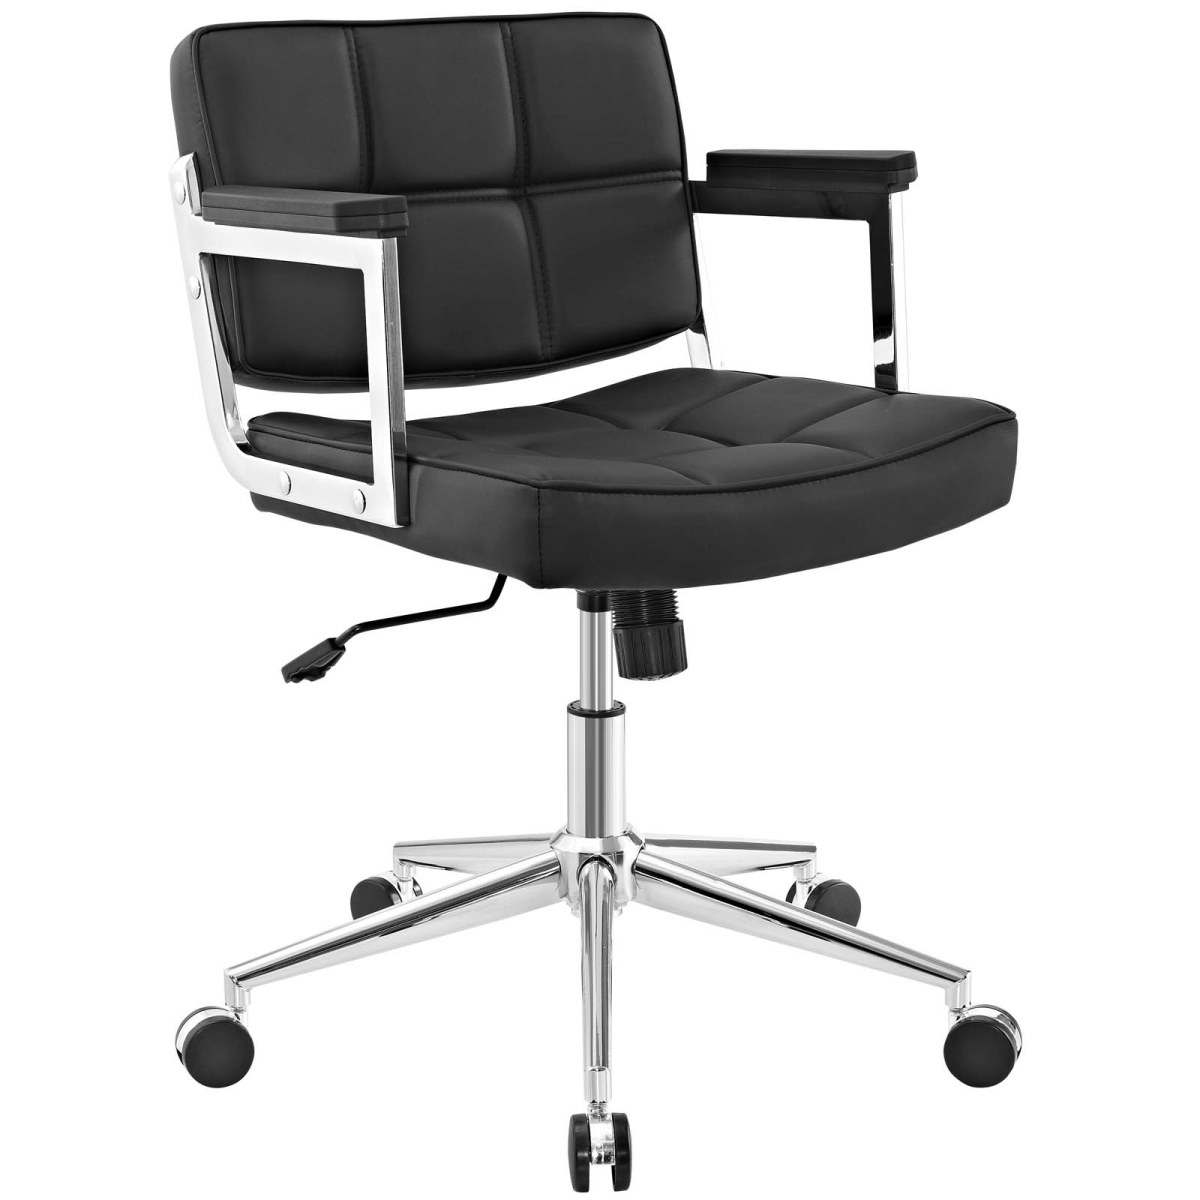 Modway Eei-2686-blk 37 - 39.5 H X 26 W X 25 L In. Portray Mid Back Upholstered Vinyl Office Chair, Black